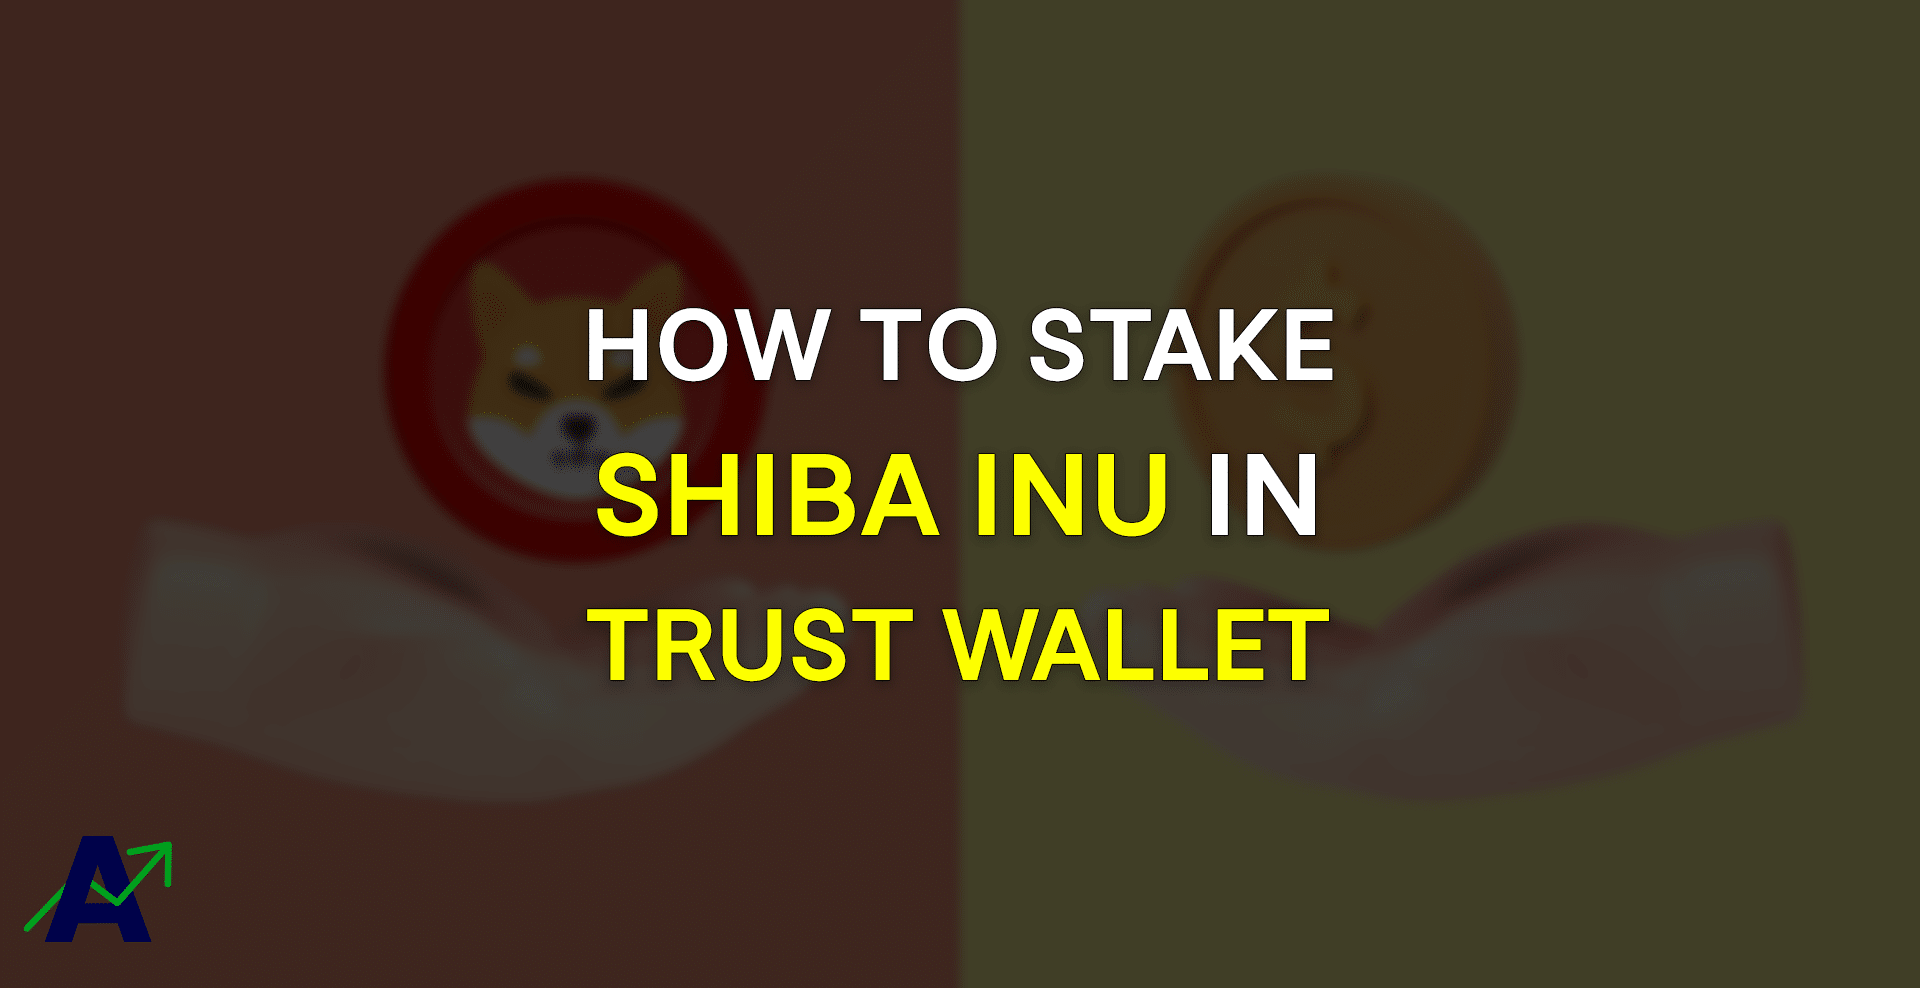 How To Stake Shiba Inu On Trust Wallet (EASILY) | Adaas Capital